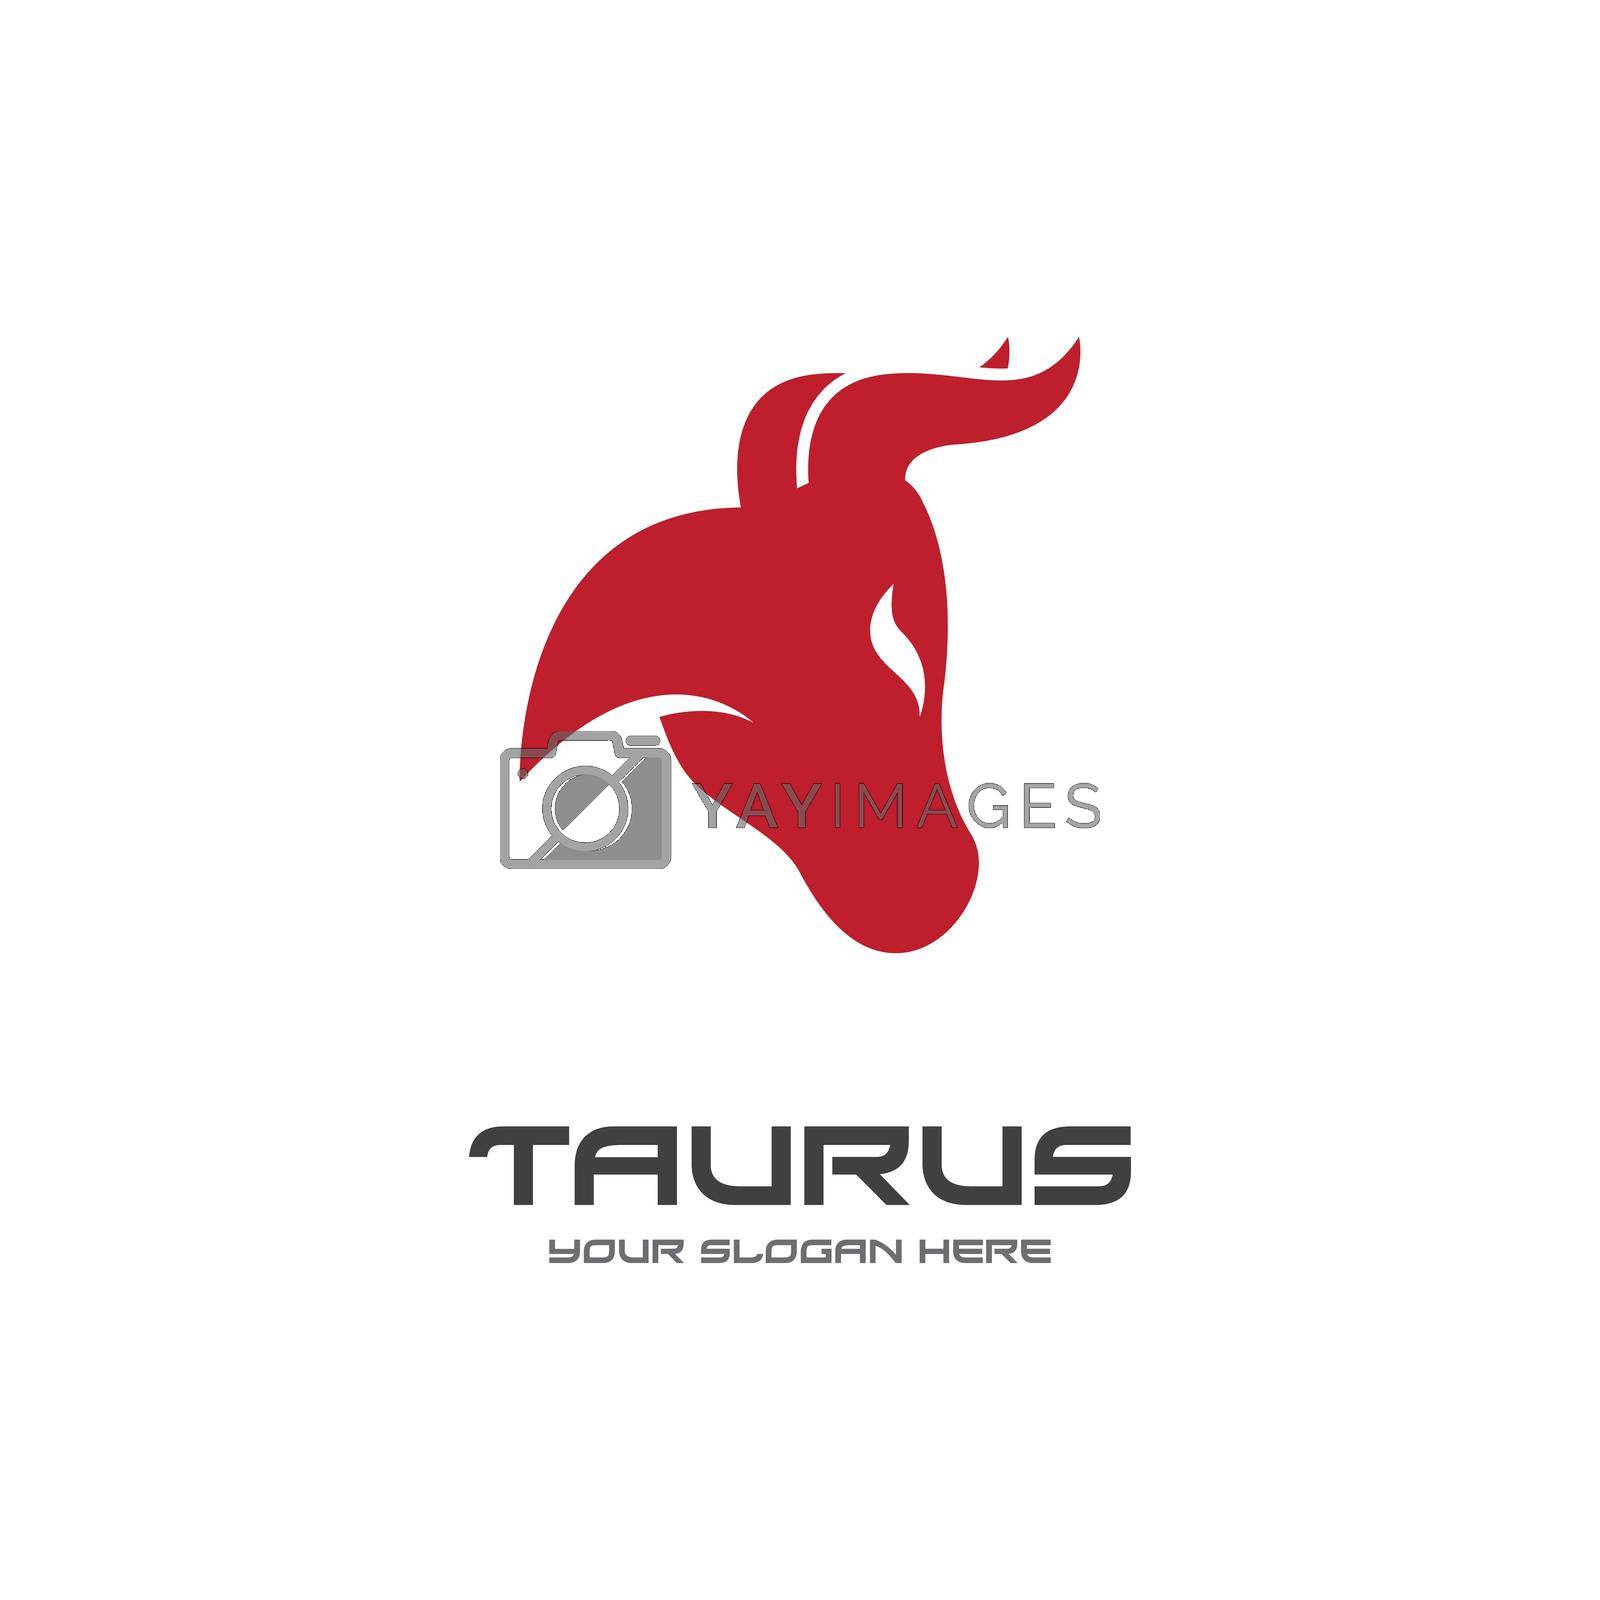 Royalty free image of Taurus by awk